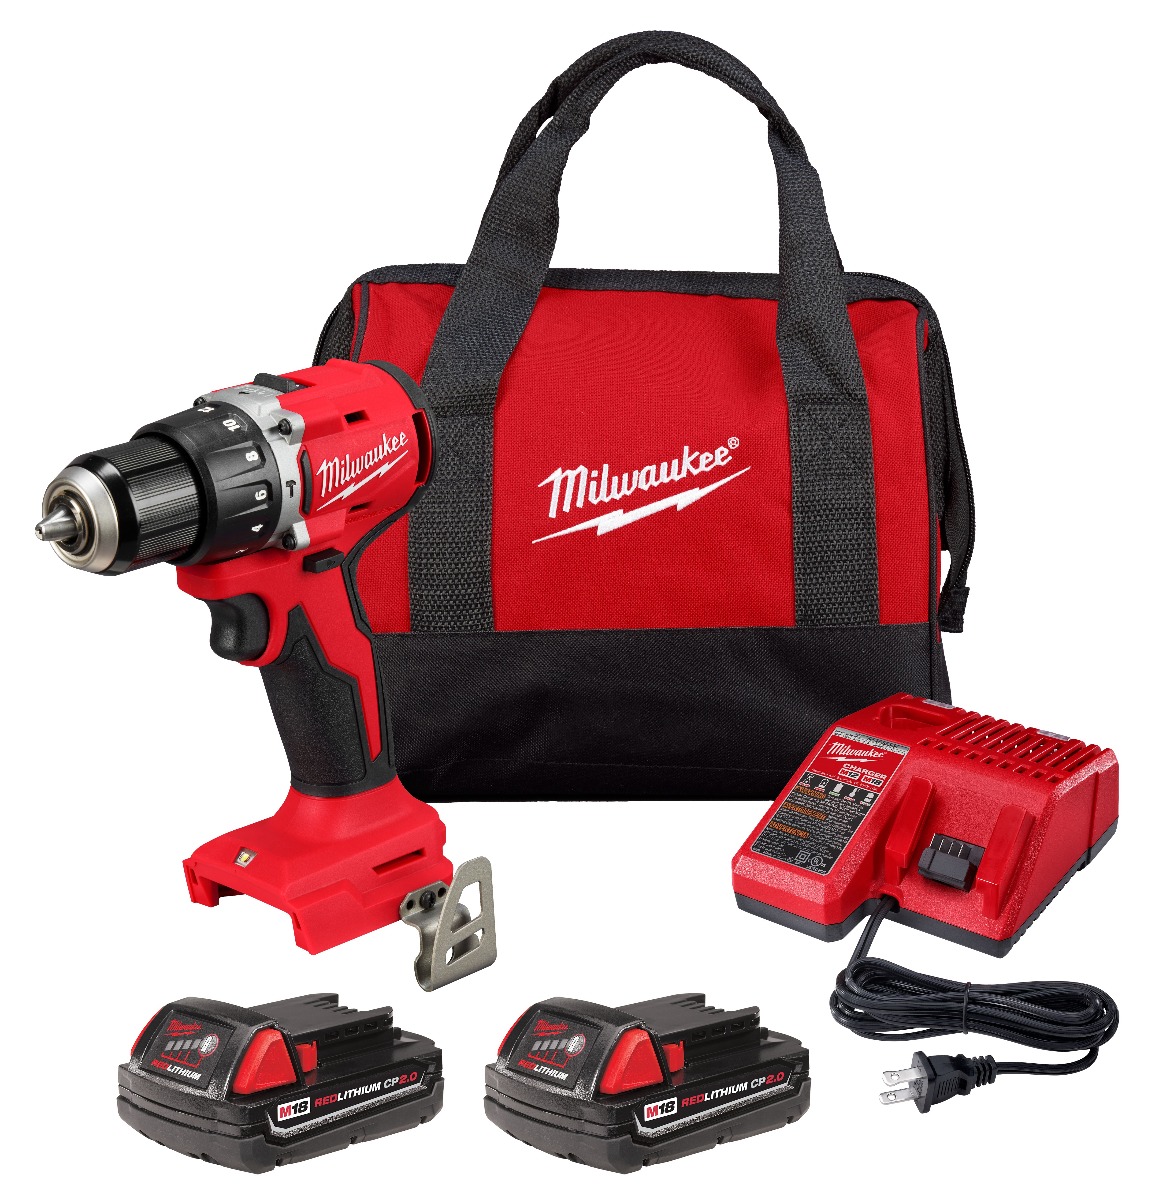 M18™ Compact Brushless 1/2" Hammer Drill/Driver Kit